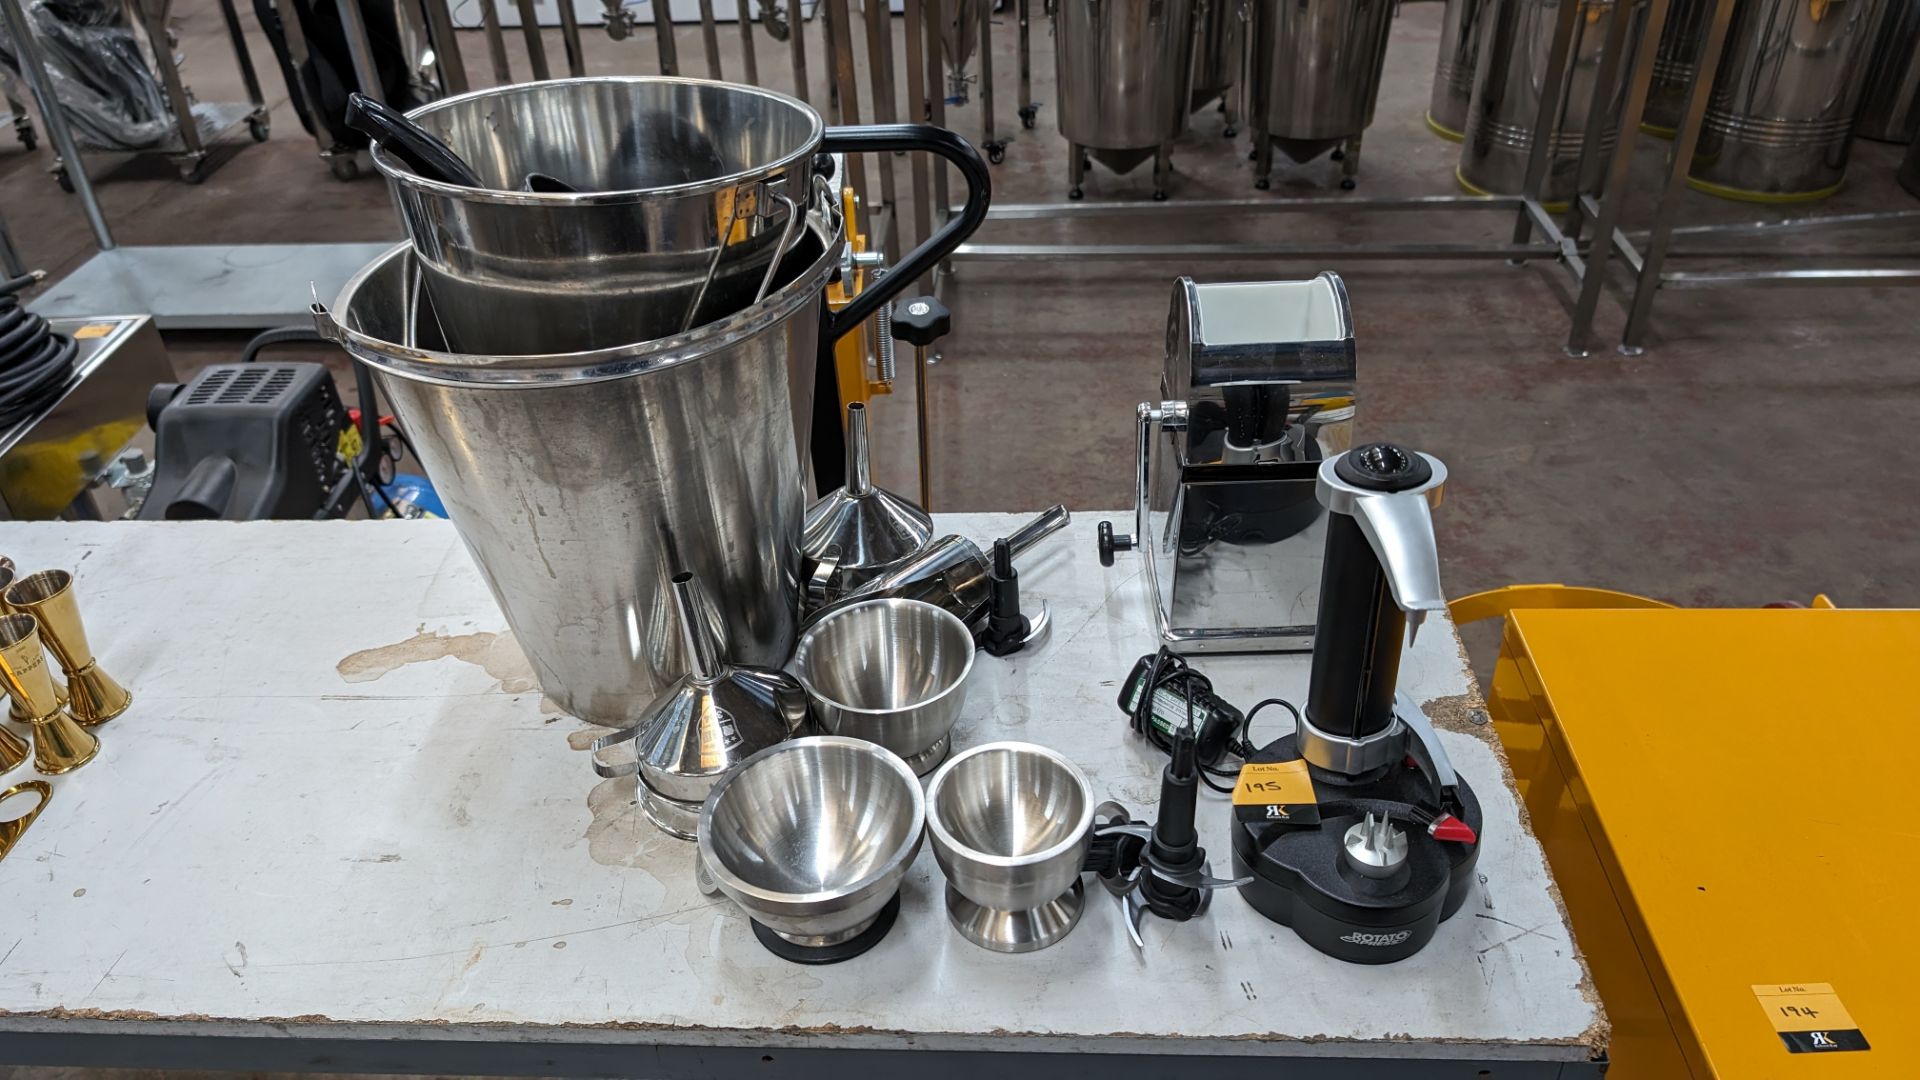 Mixed lot comprising Rotato press, ice crusher, small bowls, funnels, scoop, buckets and more - Image 2 of 8